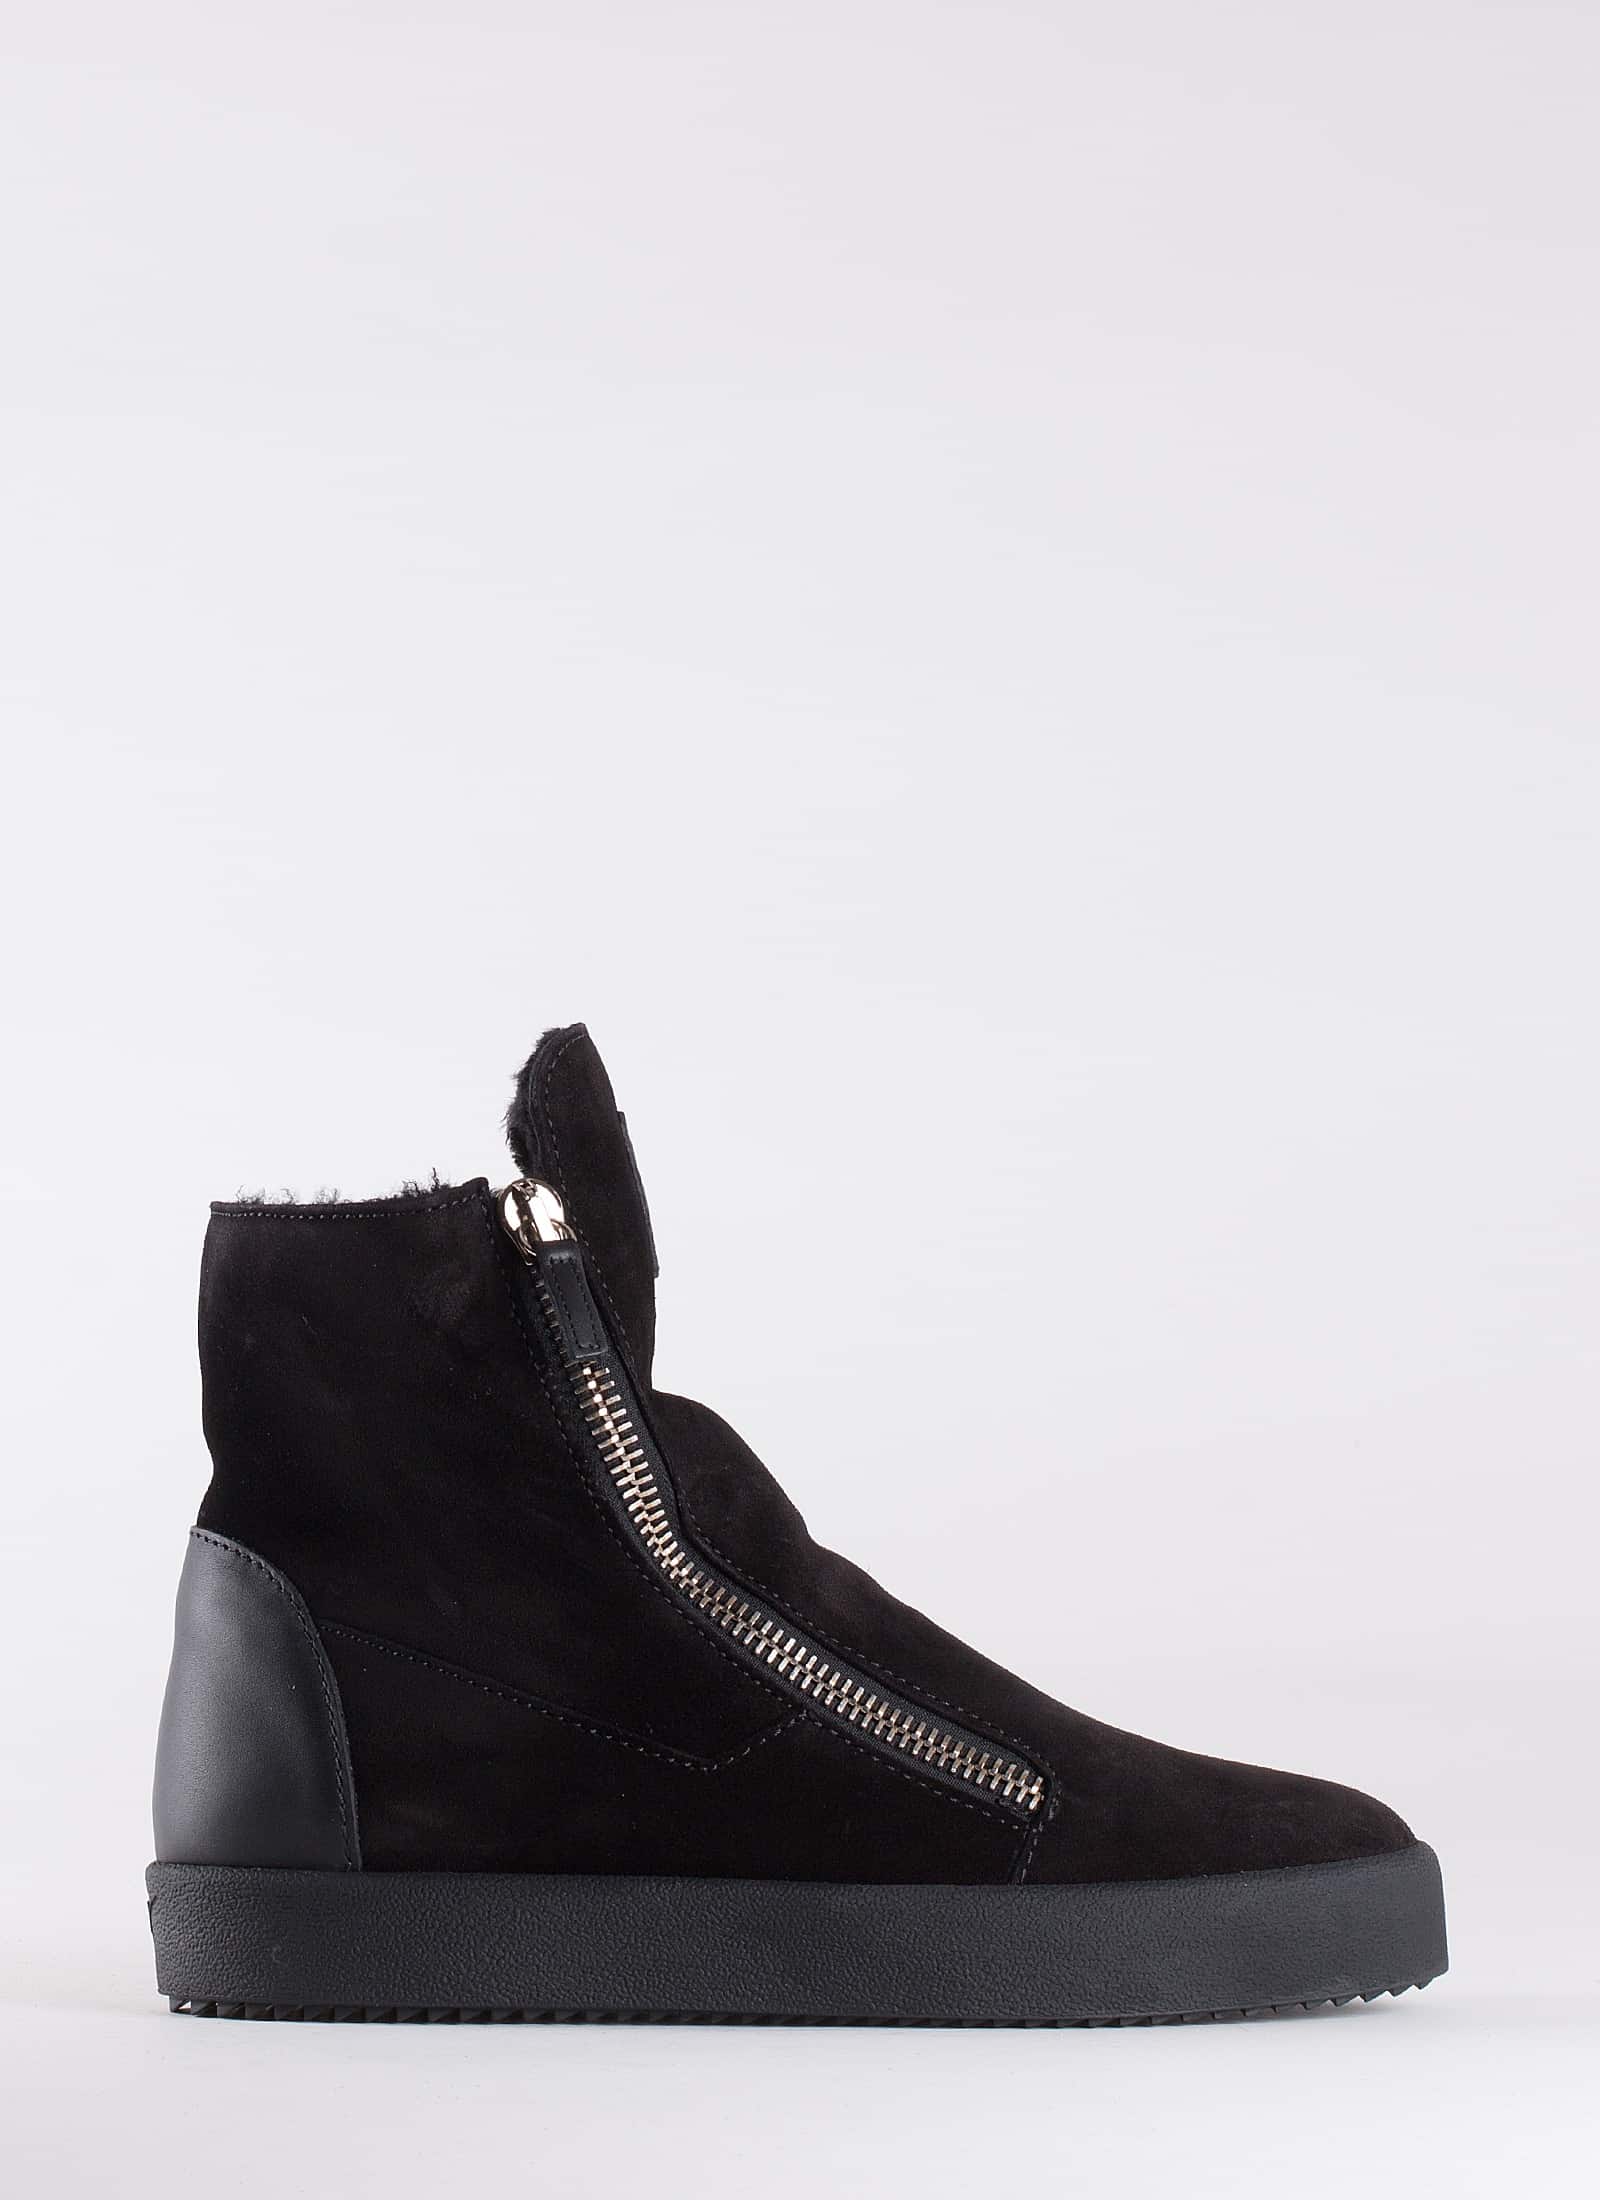 SUEDE BOOTS WITH FUR - GIUSEPPE ZANOTTI